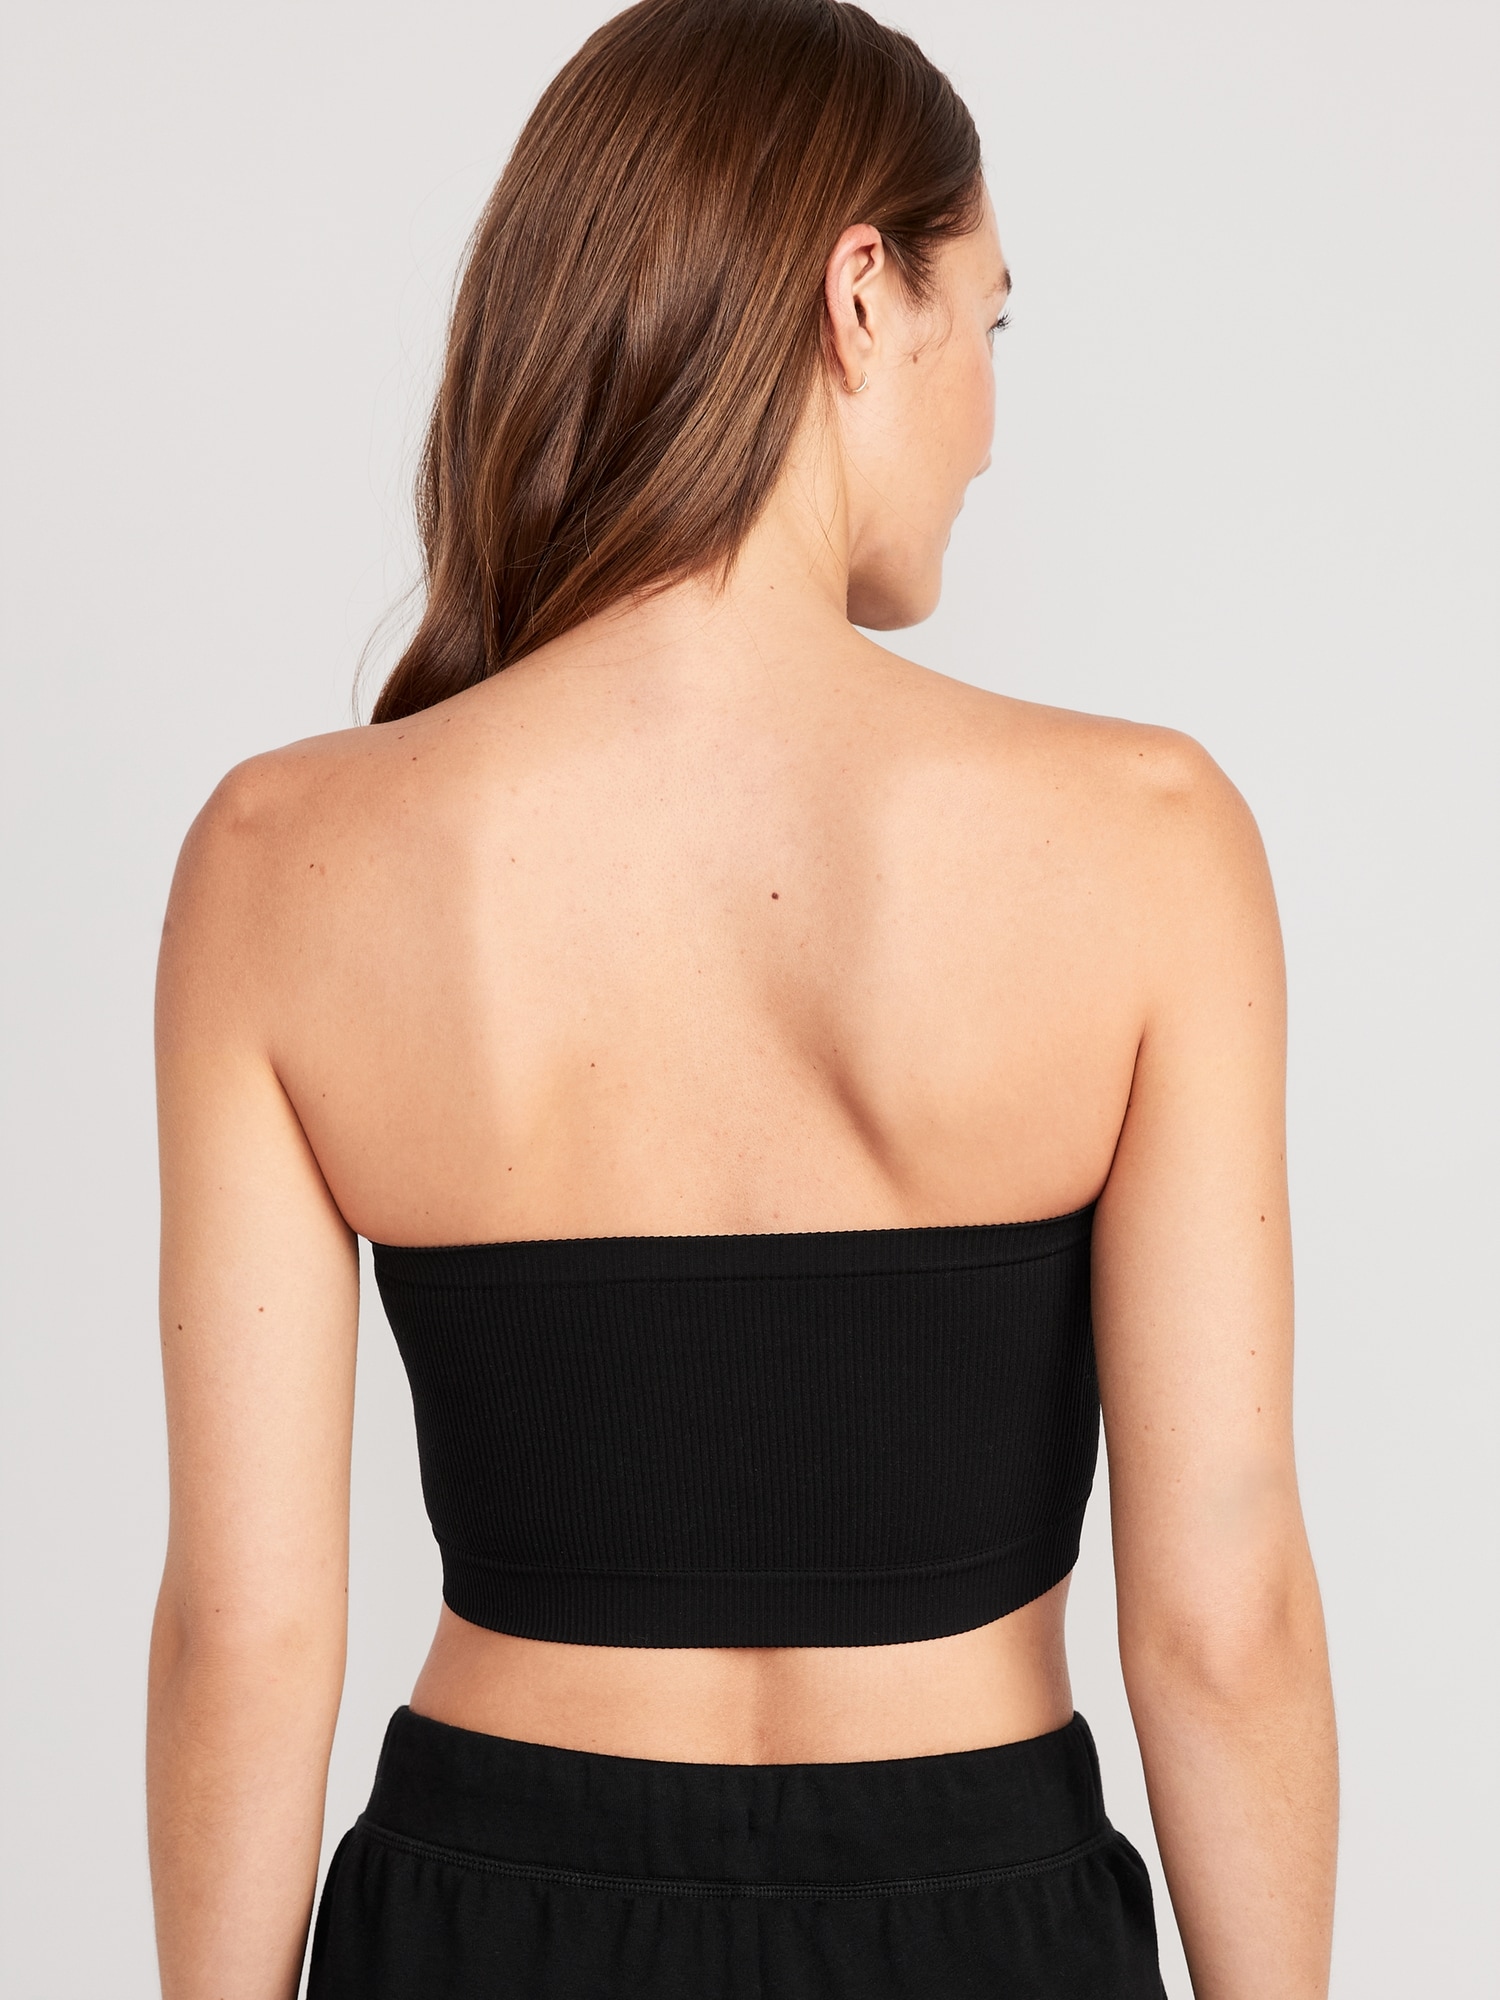 Strapless Bandeau Tube Top - Fits Small to XL - Seamless - Microfiber